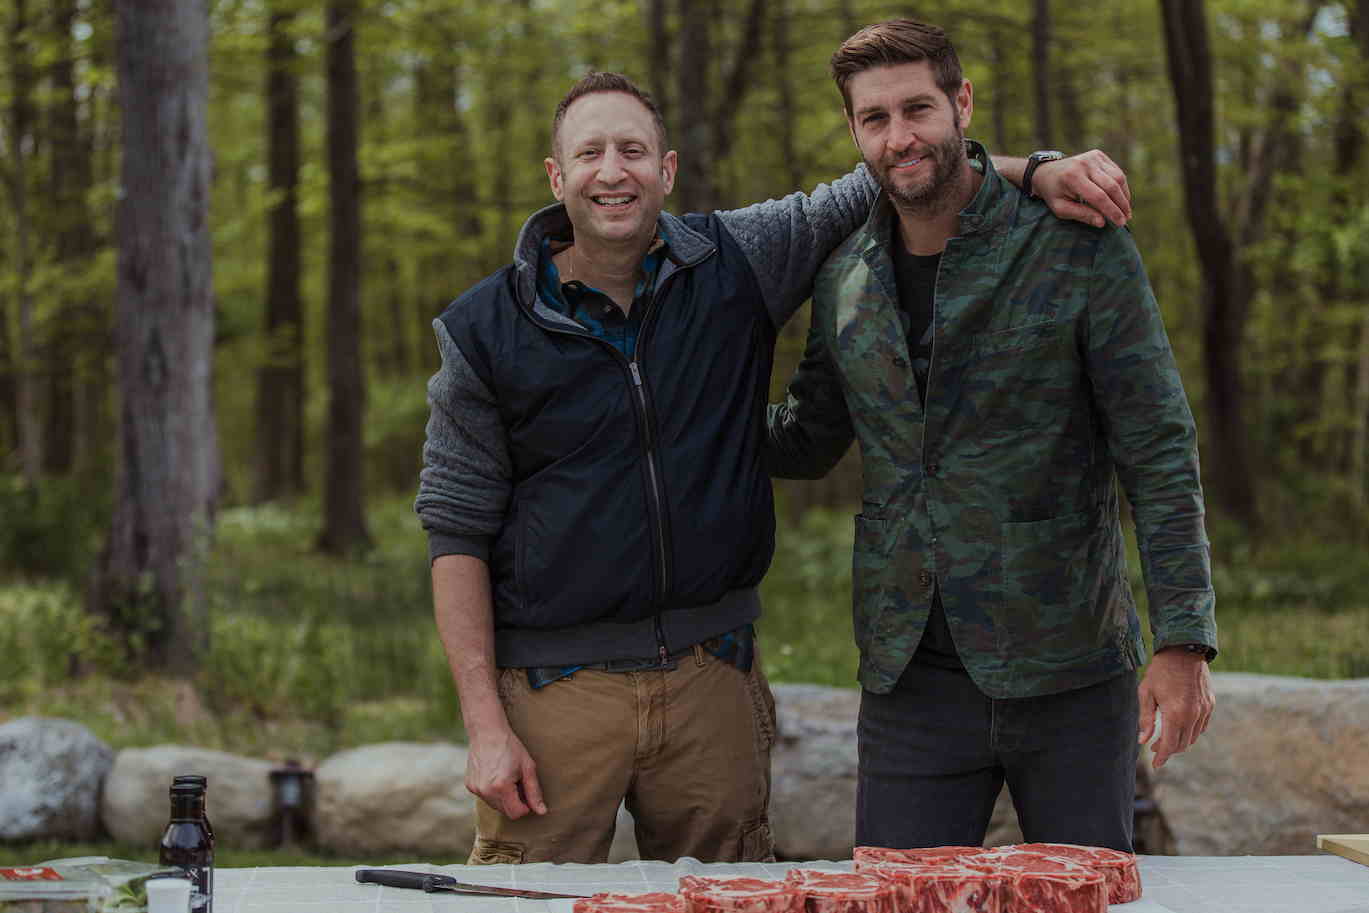 Jay Cutler Just Launched a Meat Subscription Box